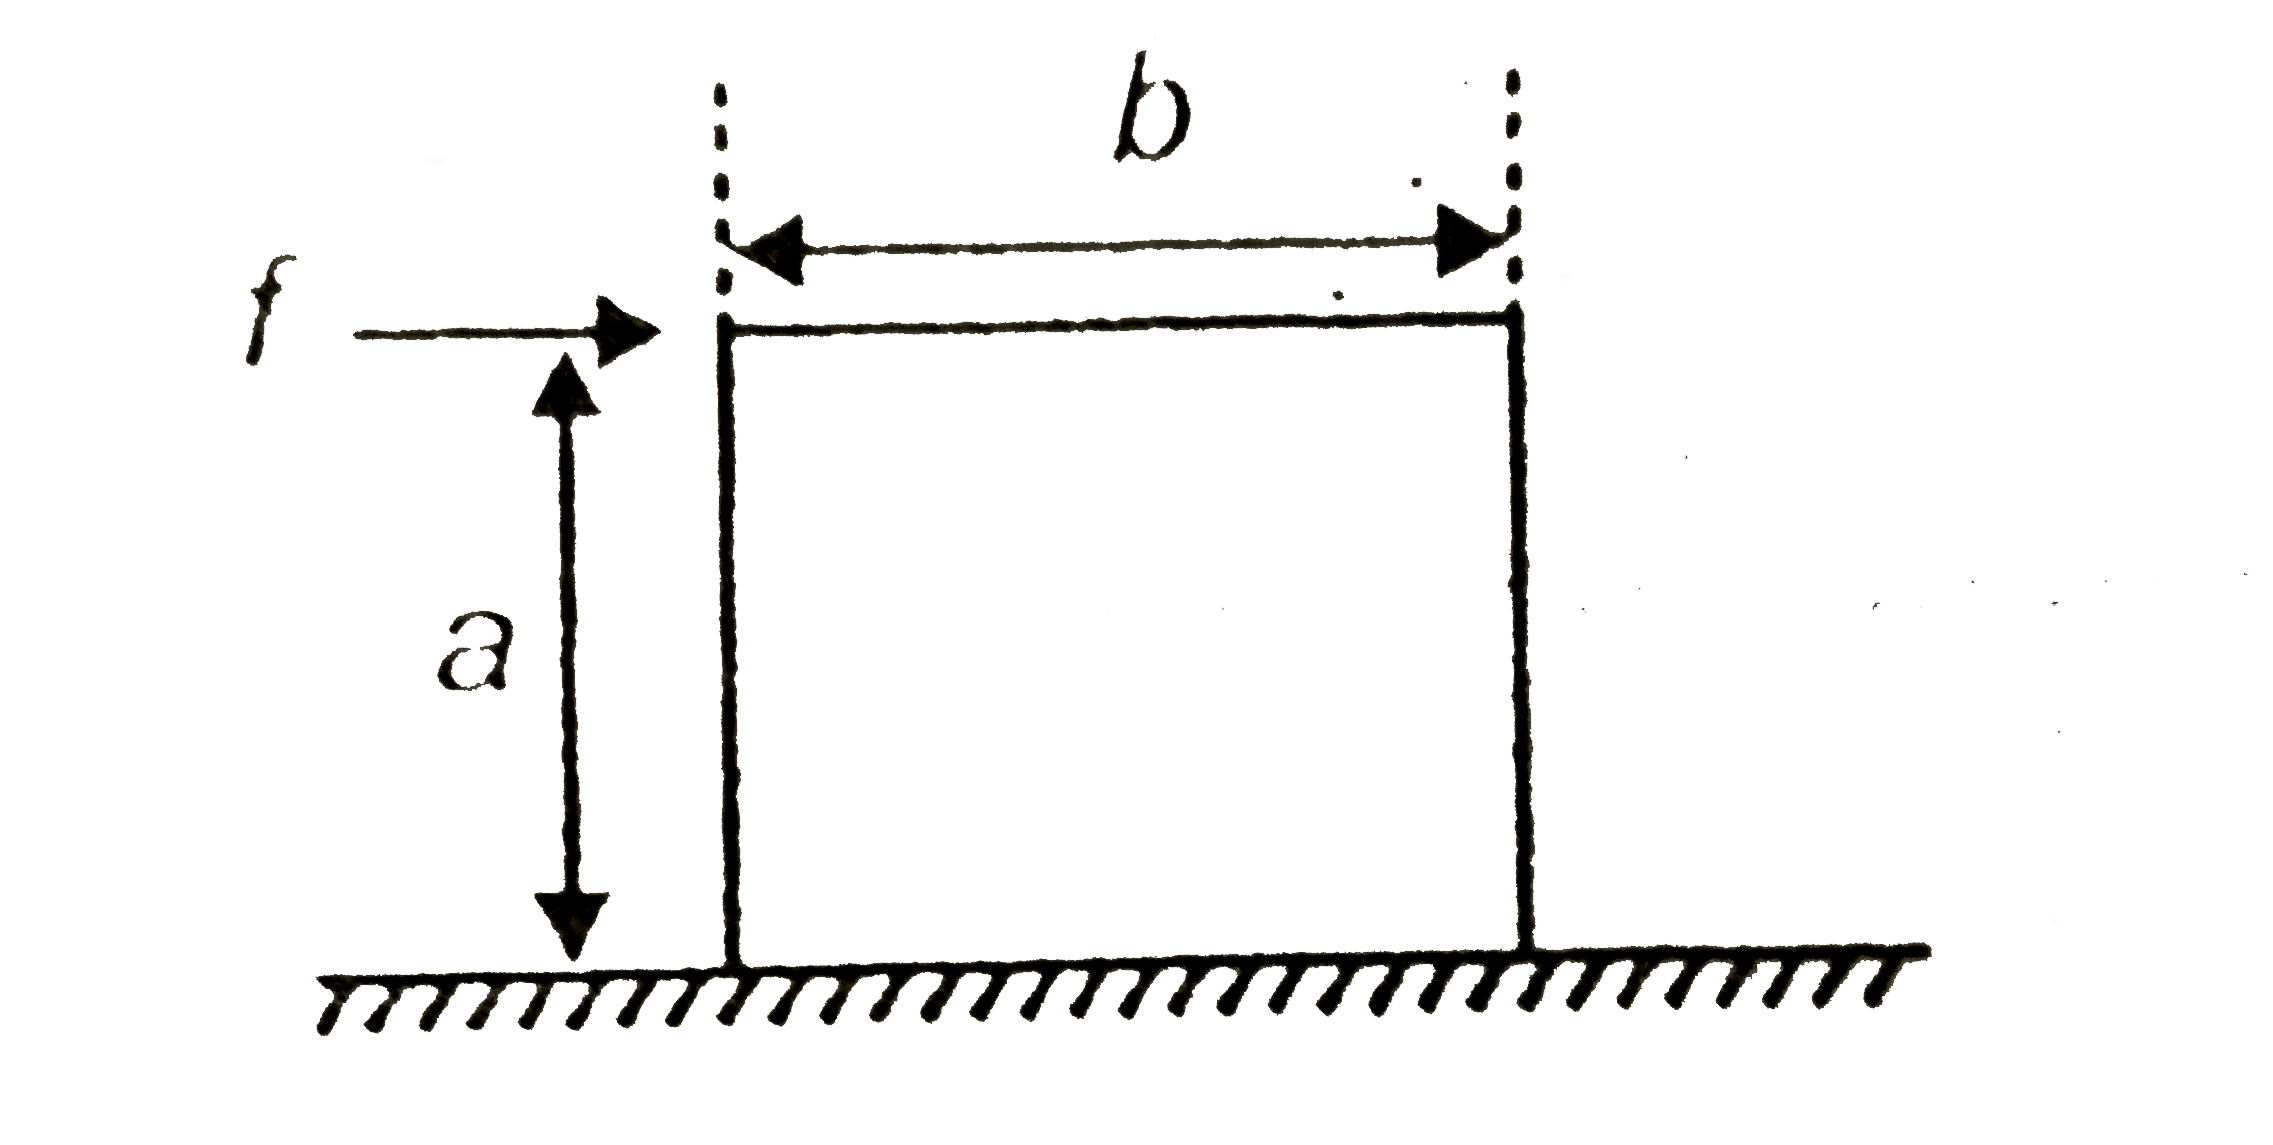 A cubical block of height a and width b is placed on the horizontal surface with sufficient fricition. For a given force.